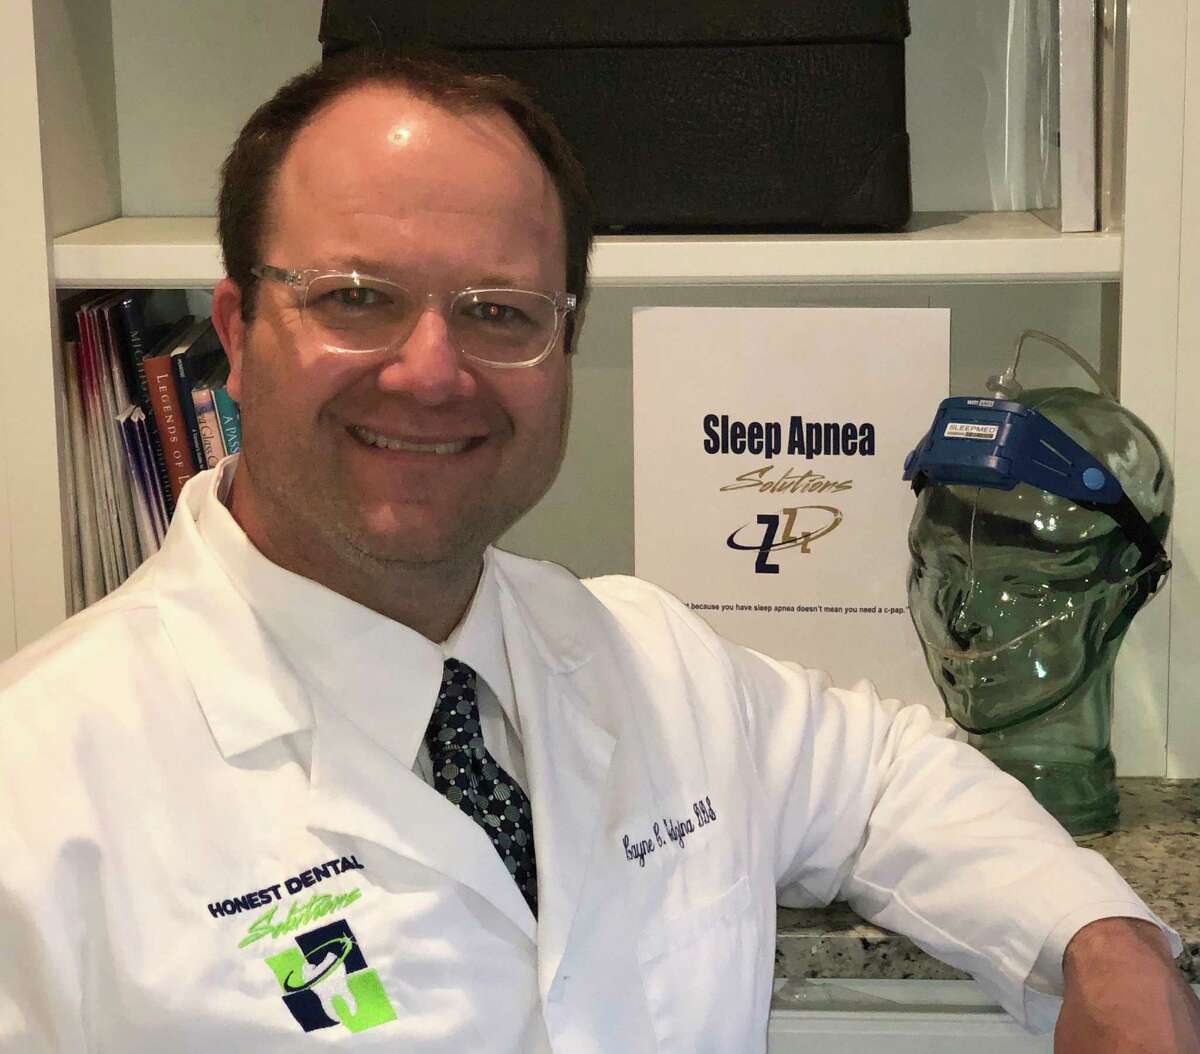 Layne Godzina, DDS, founded Honest Dental Solutions in 2018 and Sleep Apnea Solutions in 2019. (Courtesy photo)